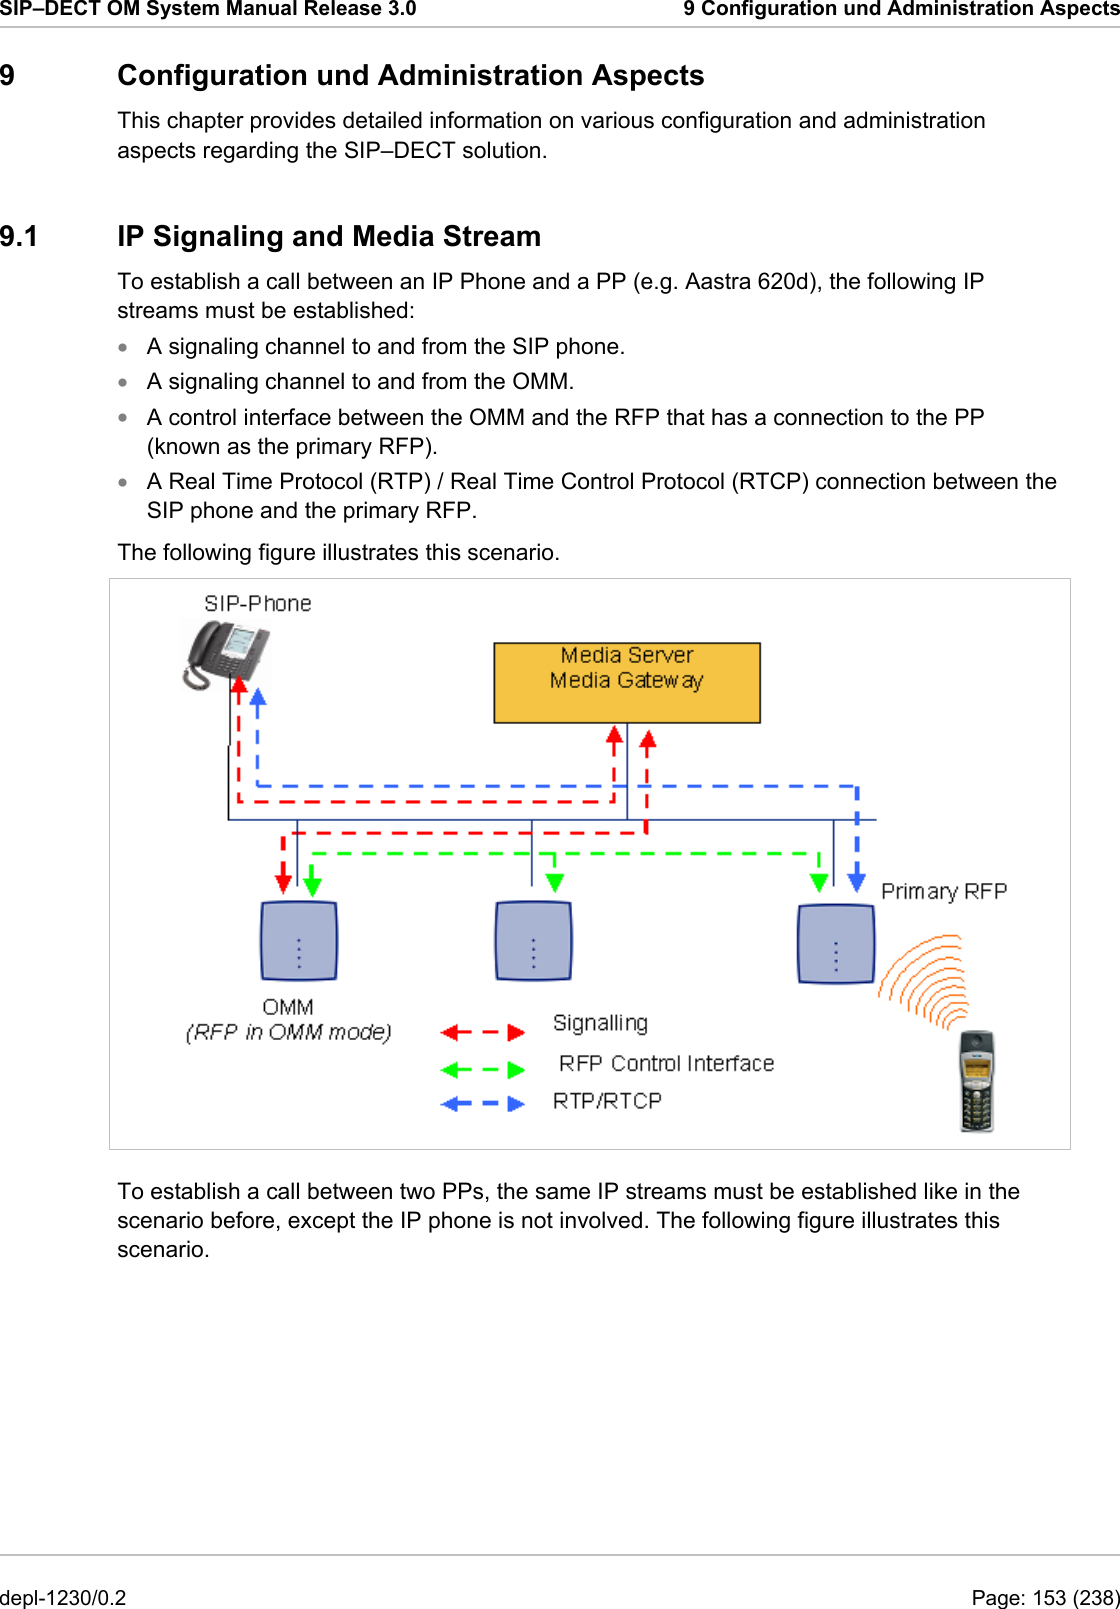 SIP–DECT OM System Manual Release 3.0  9 Configuration und Administration Aspects 9  Configuration und Administration Aspects This chapter provides detailed information on various configuration and administration aspects regarding the SIP–DECT solution. 9.1  IP Signaling and Media Stream To establish a call between an IP Phone and a PP (e.g. Aastra 620d), the following IP streams must be established: A signaling channel to and from the SIP phone. • • • • A signaling channel to and from the OMM. A control interface between the OMM and the RFP that has a connection to the PP (known as the primary RFP). A Real Time Protocol (RTP) / Real Time Control Protocol (RTCP) connection between the SIP phone and the primary RFP. The following figure illustrates this scenario.  To establish a call between two PPs, the same IP streams must be established like in the scenario before, except the IP phone is not involved. The following figure illustrates this scenario. depl-1230/0.2  Page: 153 (238) 